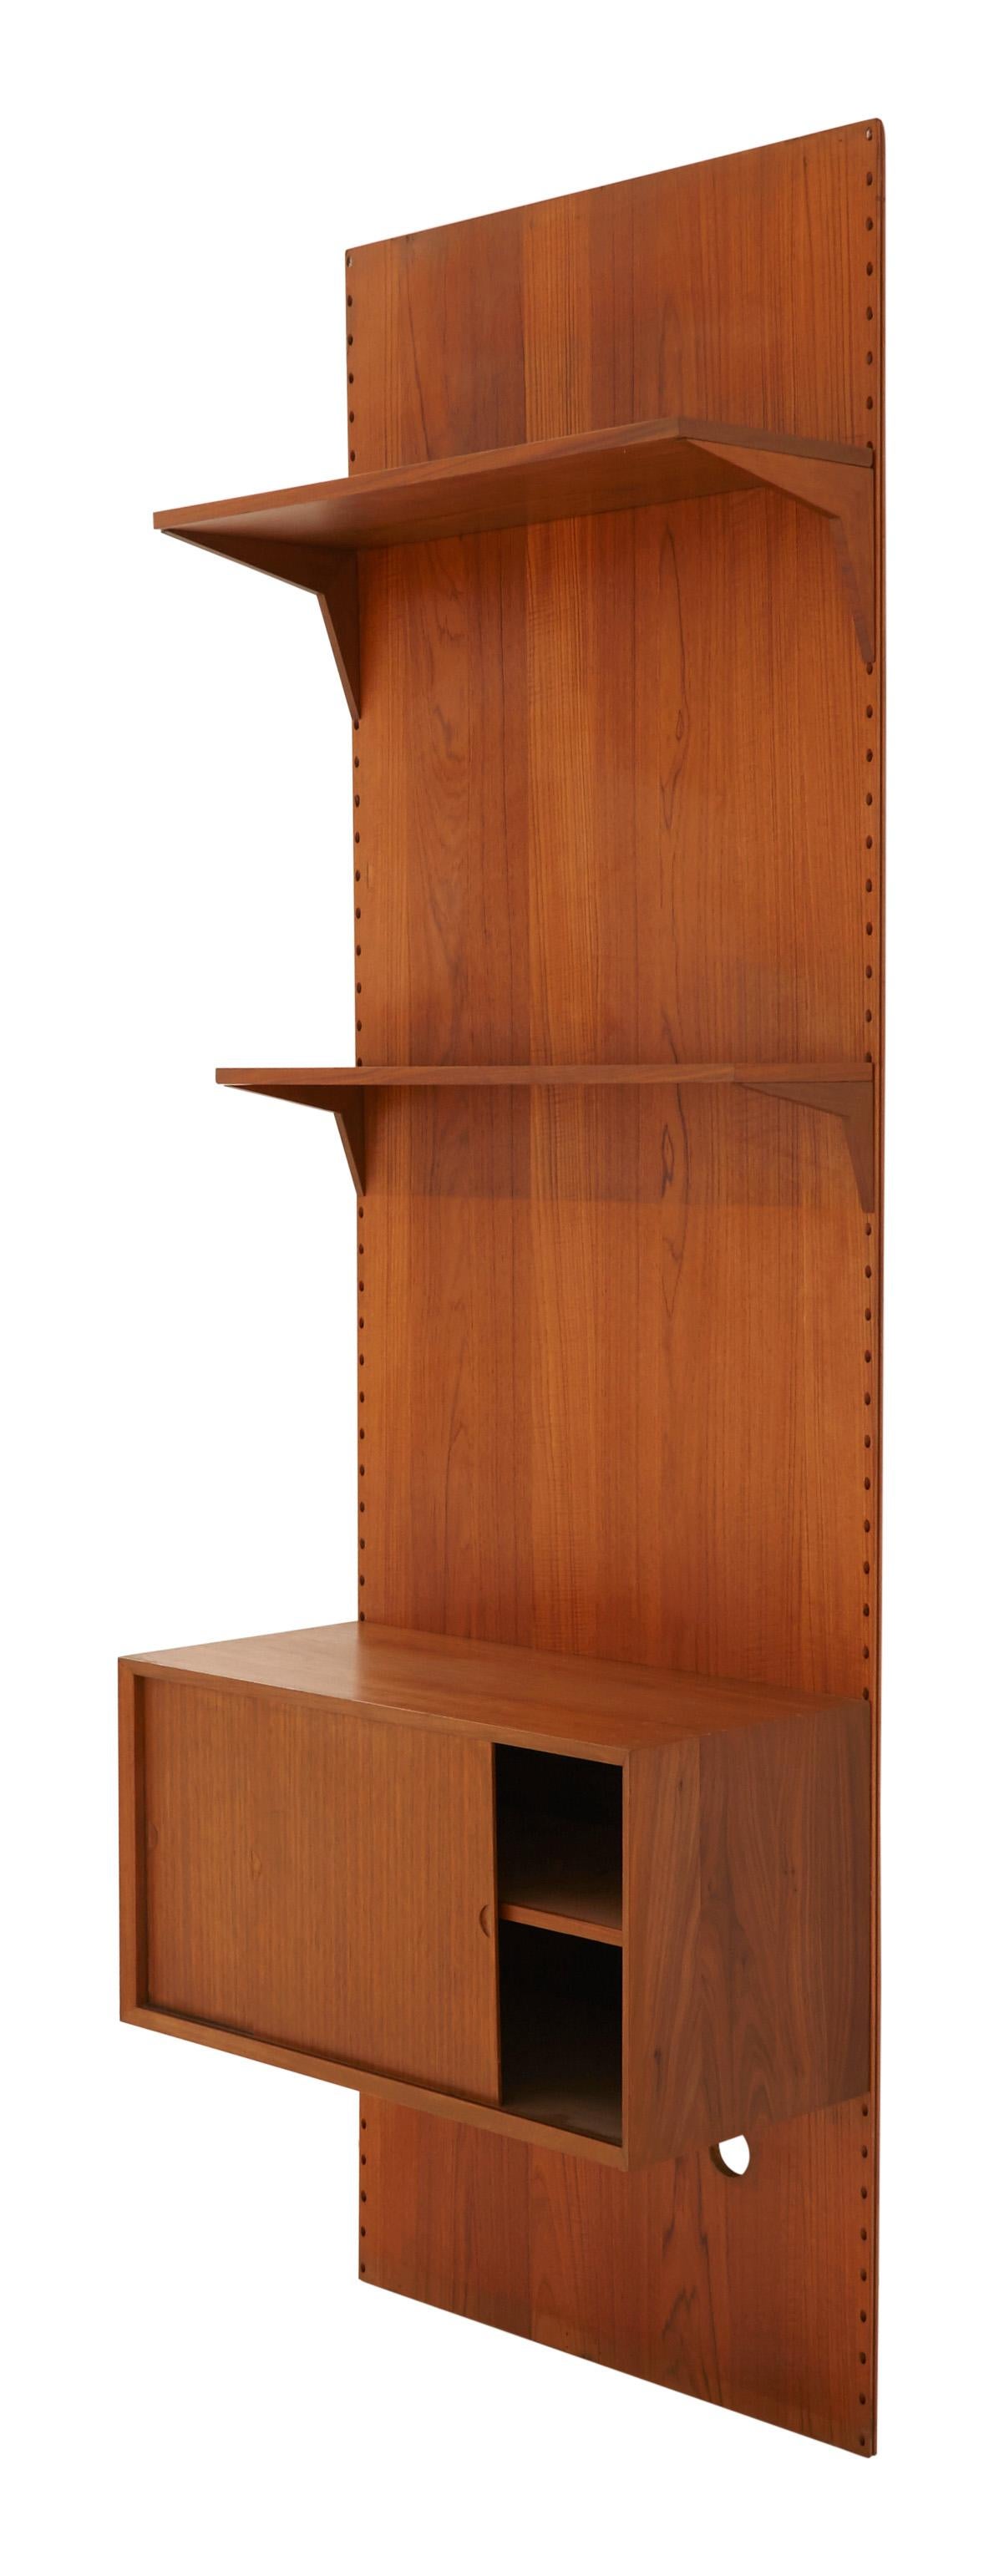 French Midcentury Teak Wall Shelving Unit For Sale